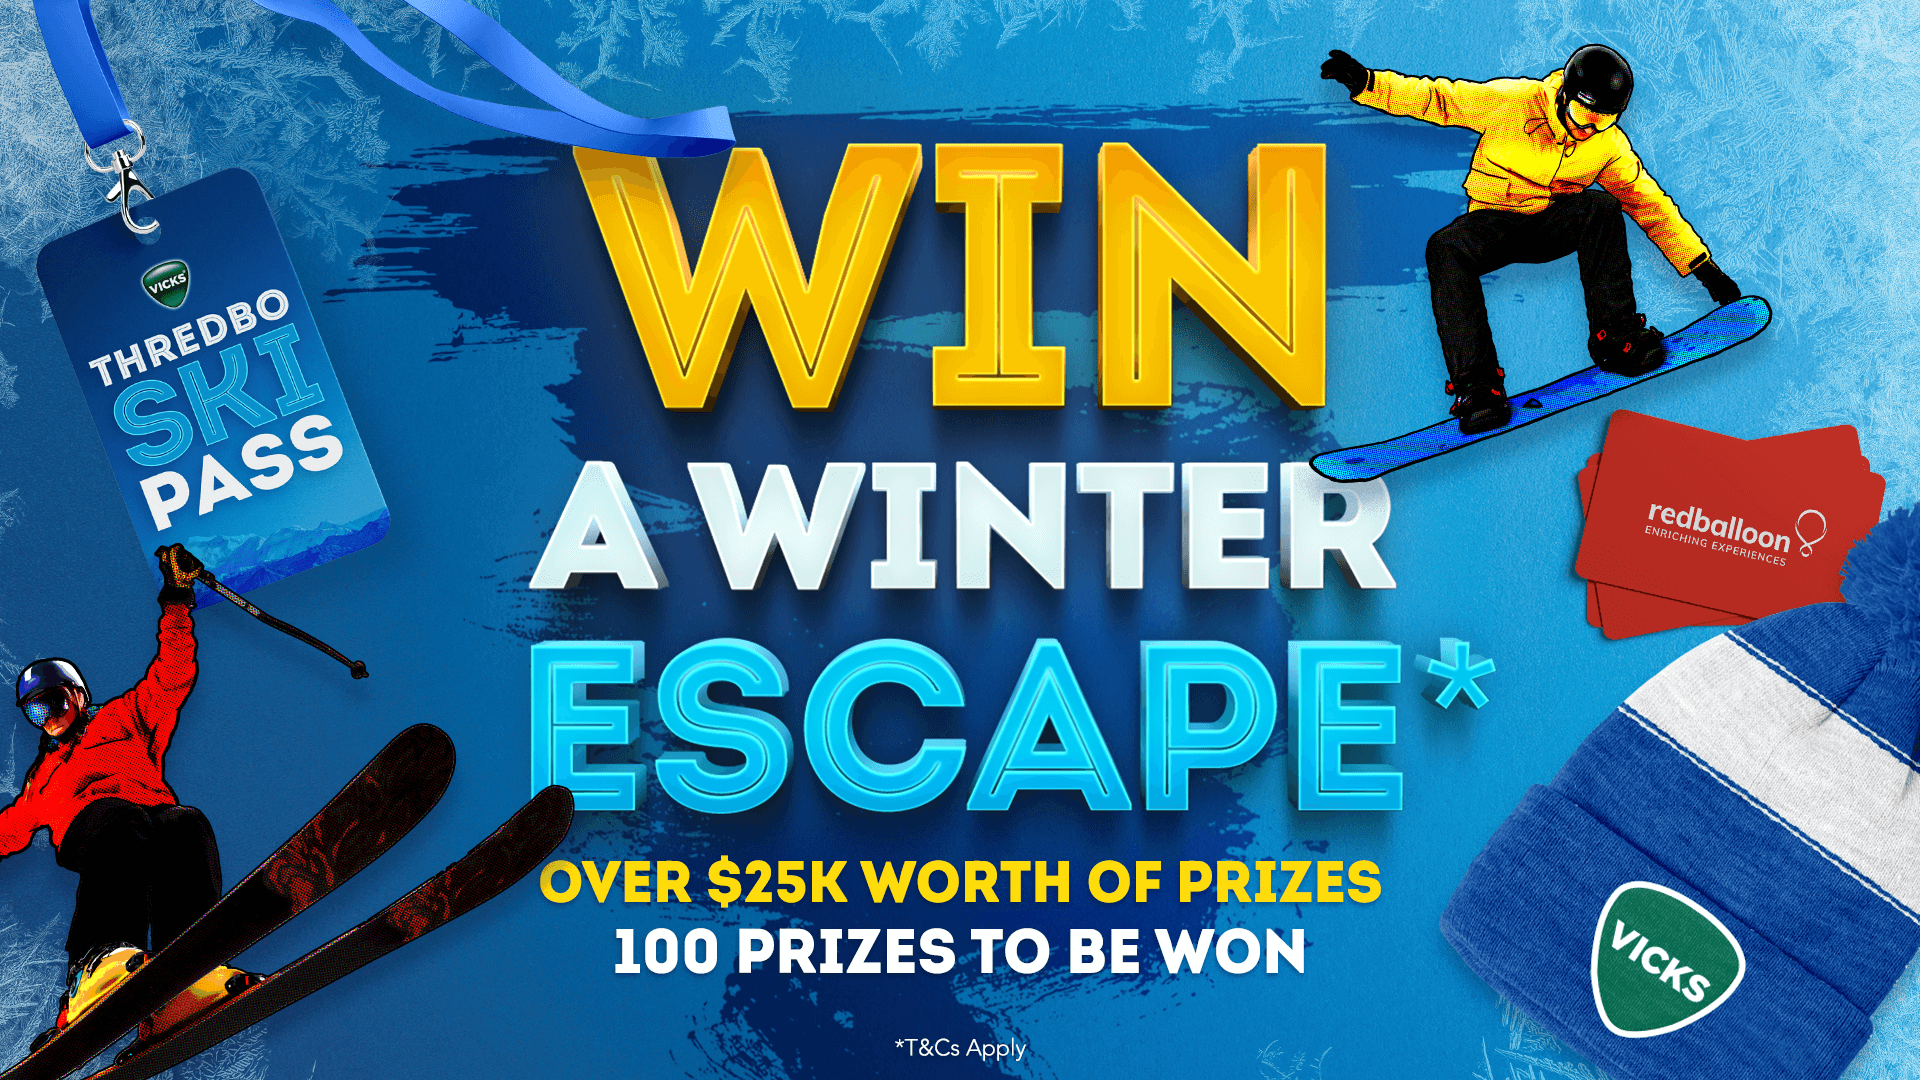 Enter below for your chance to win a winter escape